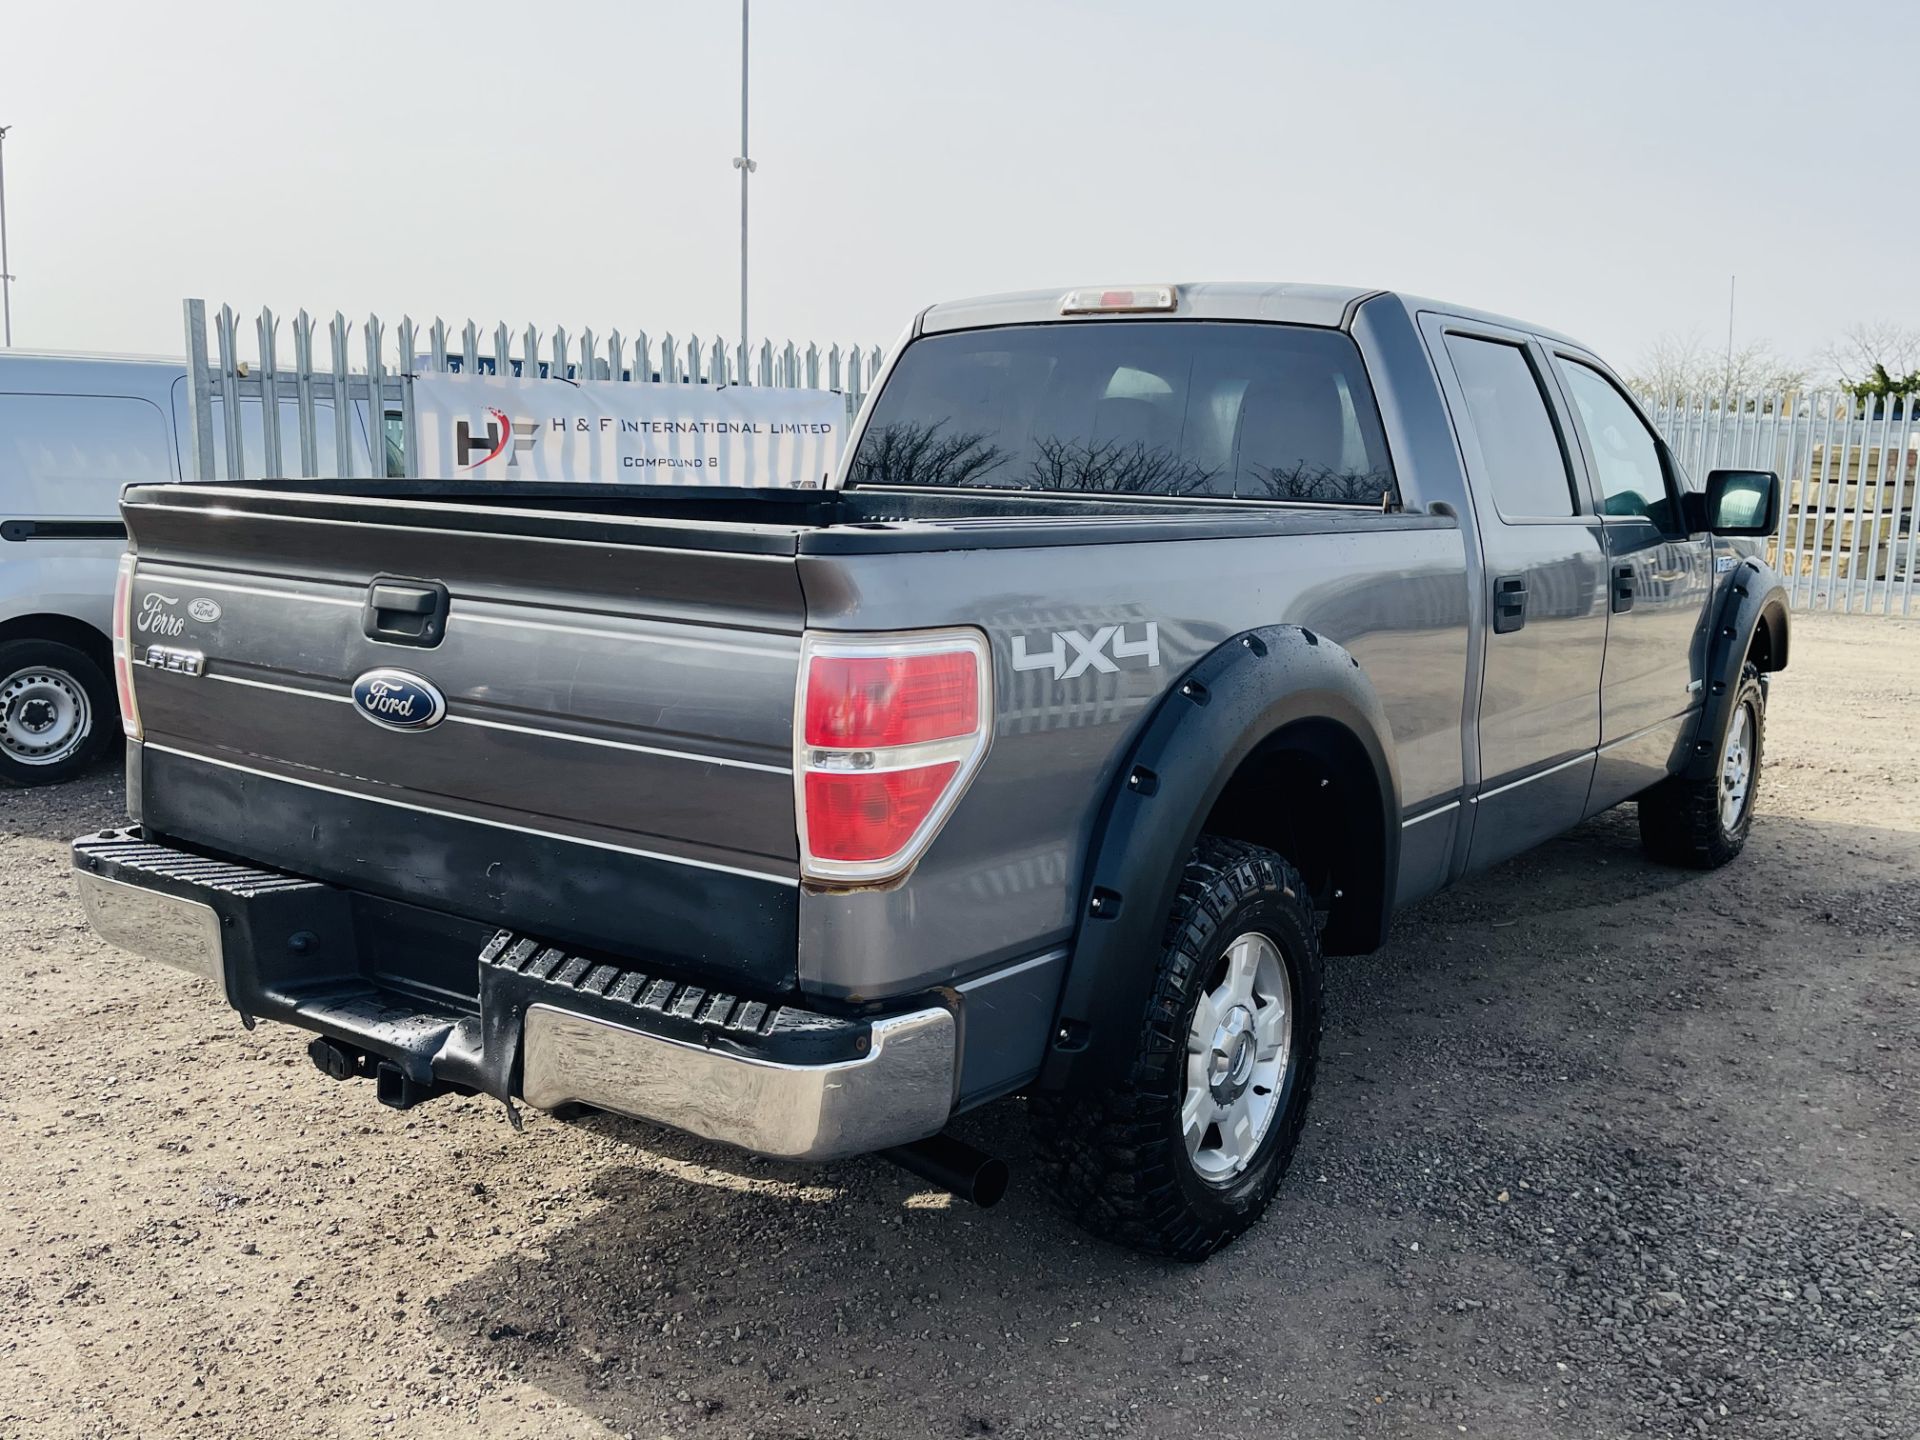 ** ON SALE **Ford F-150 XLT Edition 3.5L V6 Eco-boost Super-Crew 4x4 - '2012 Year' - Air Con - - Image 10 of 28